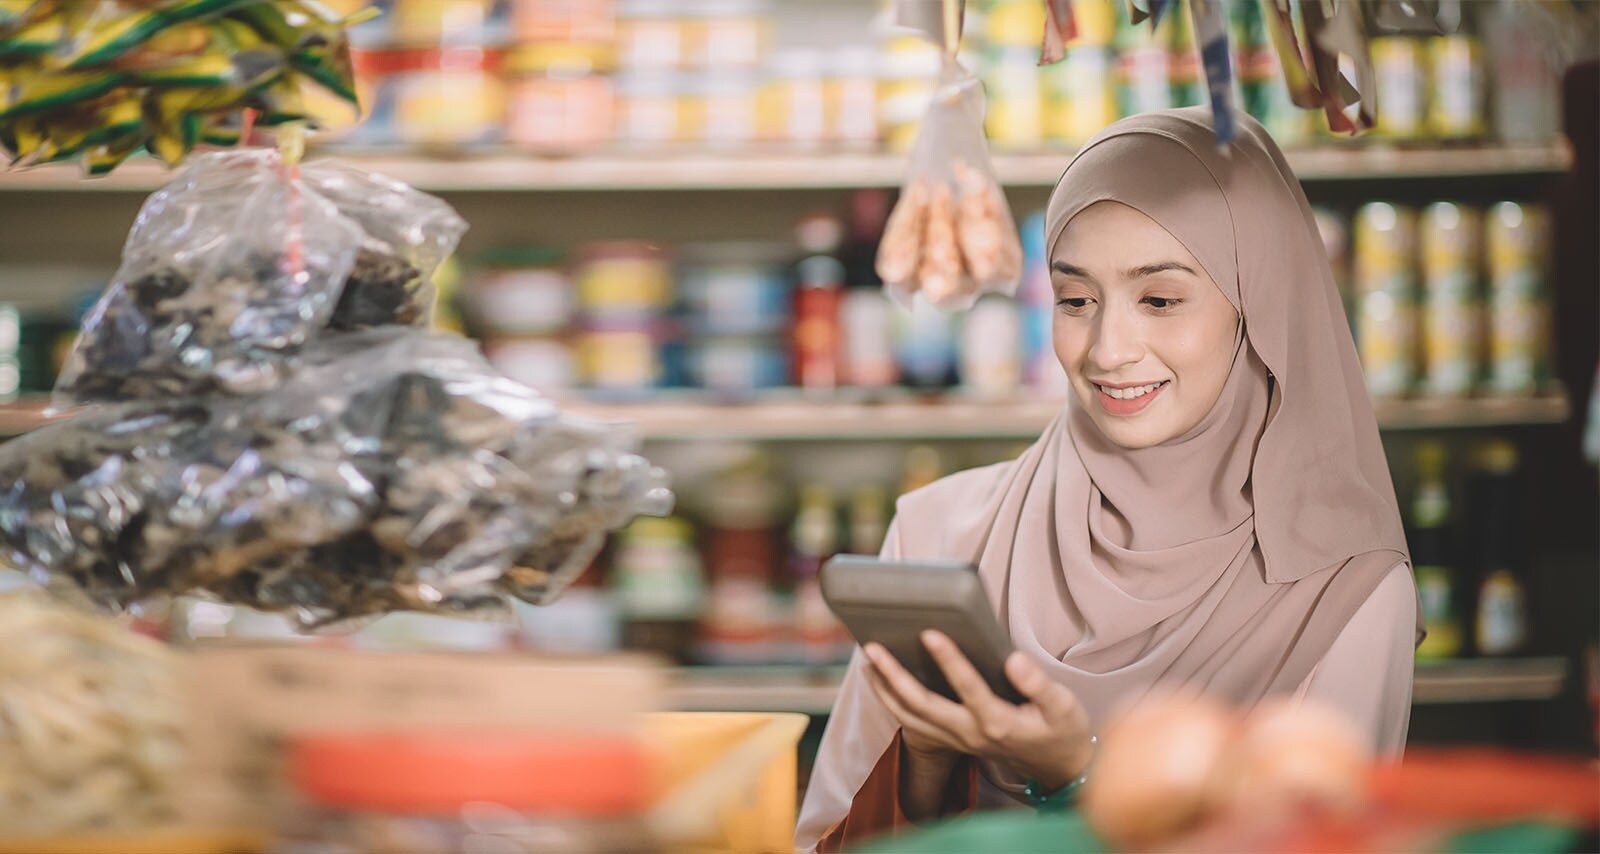 Are we ready for omnichannel retail in Malaysia?